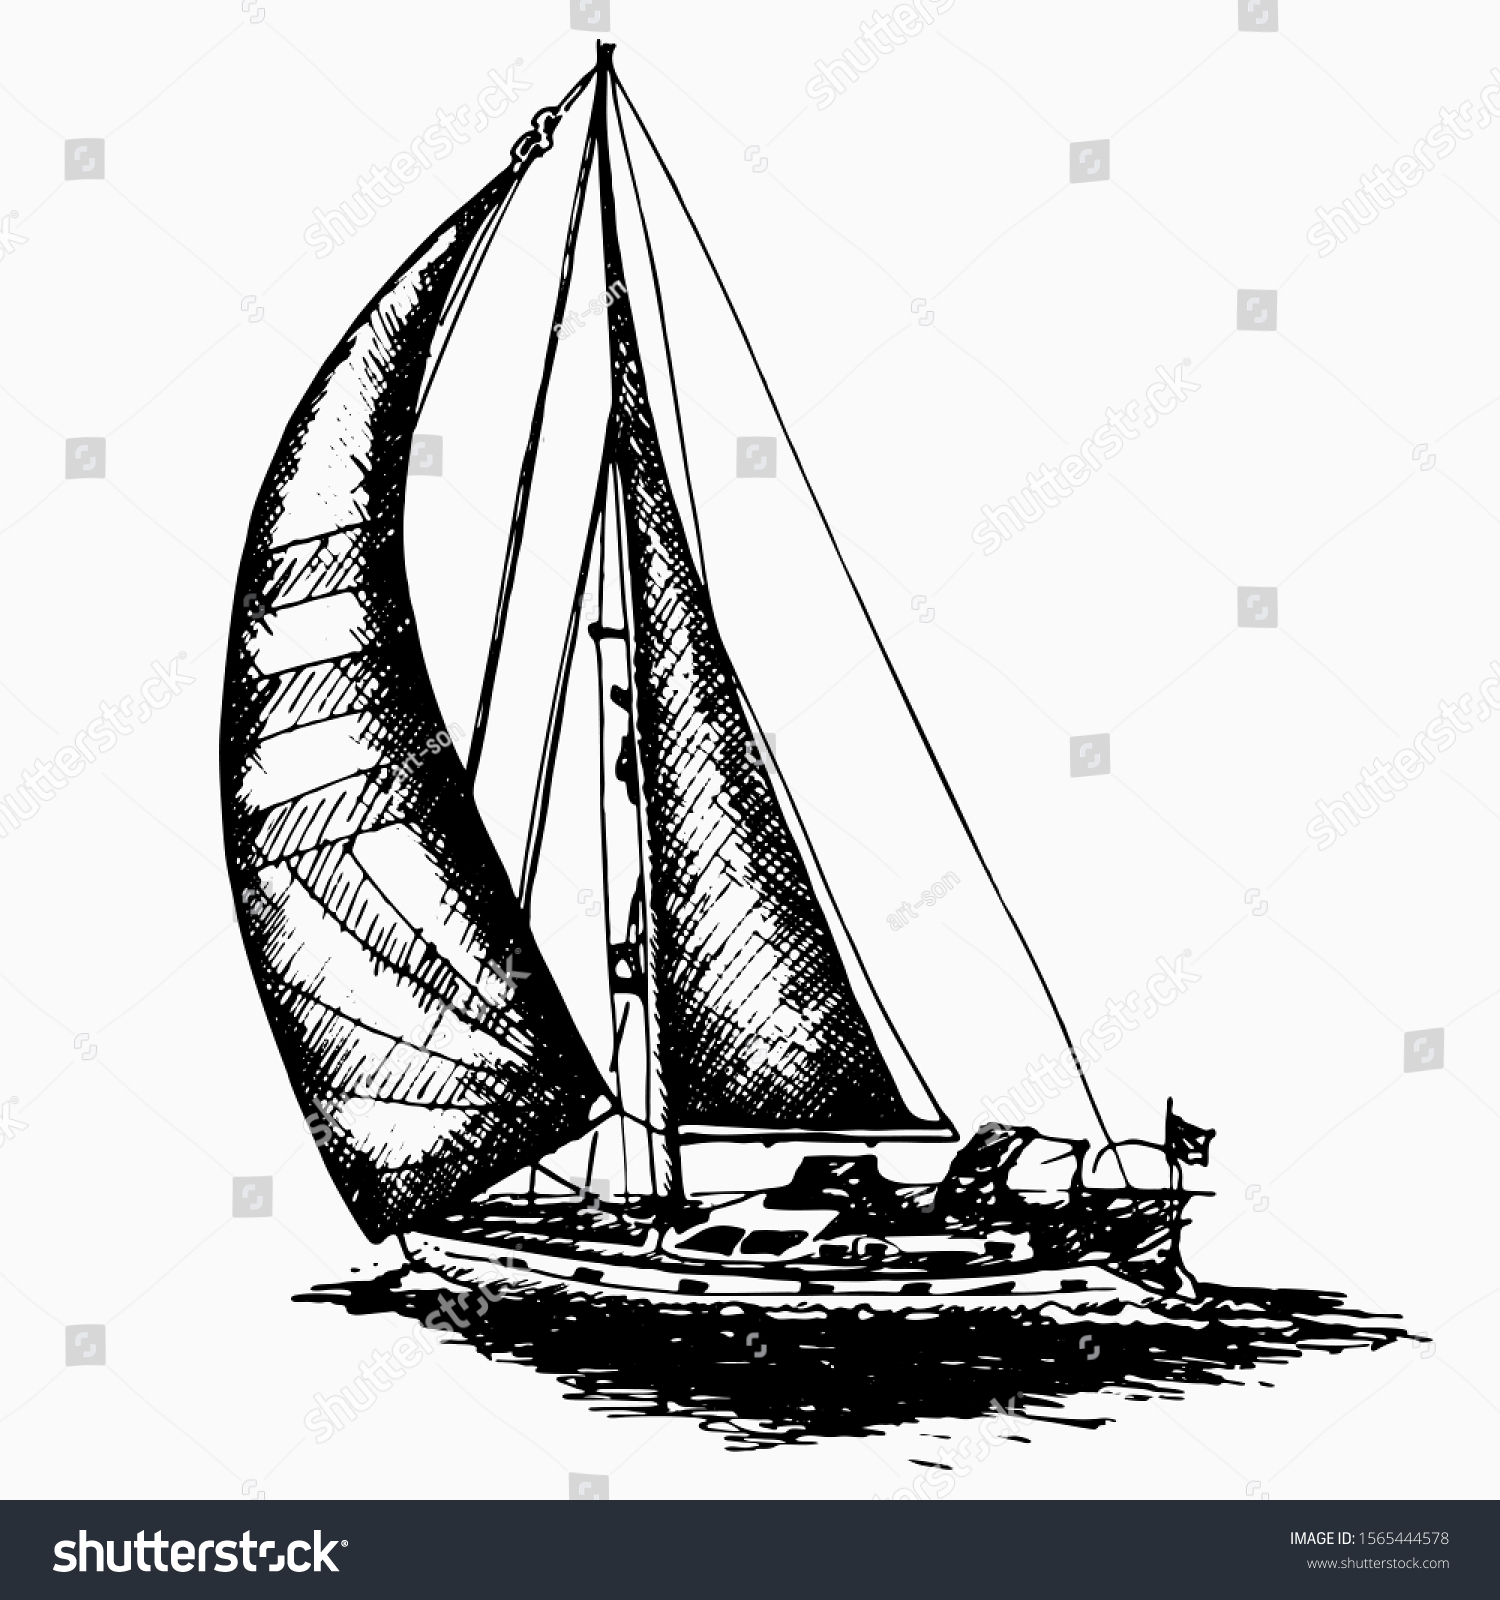 Ship Sailing Yacht Boat Antique Vintage Stock Vector (Royalty Free ...